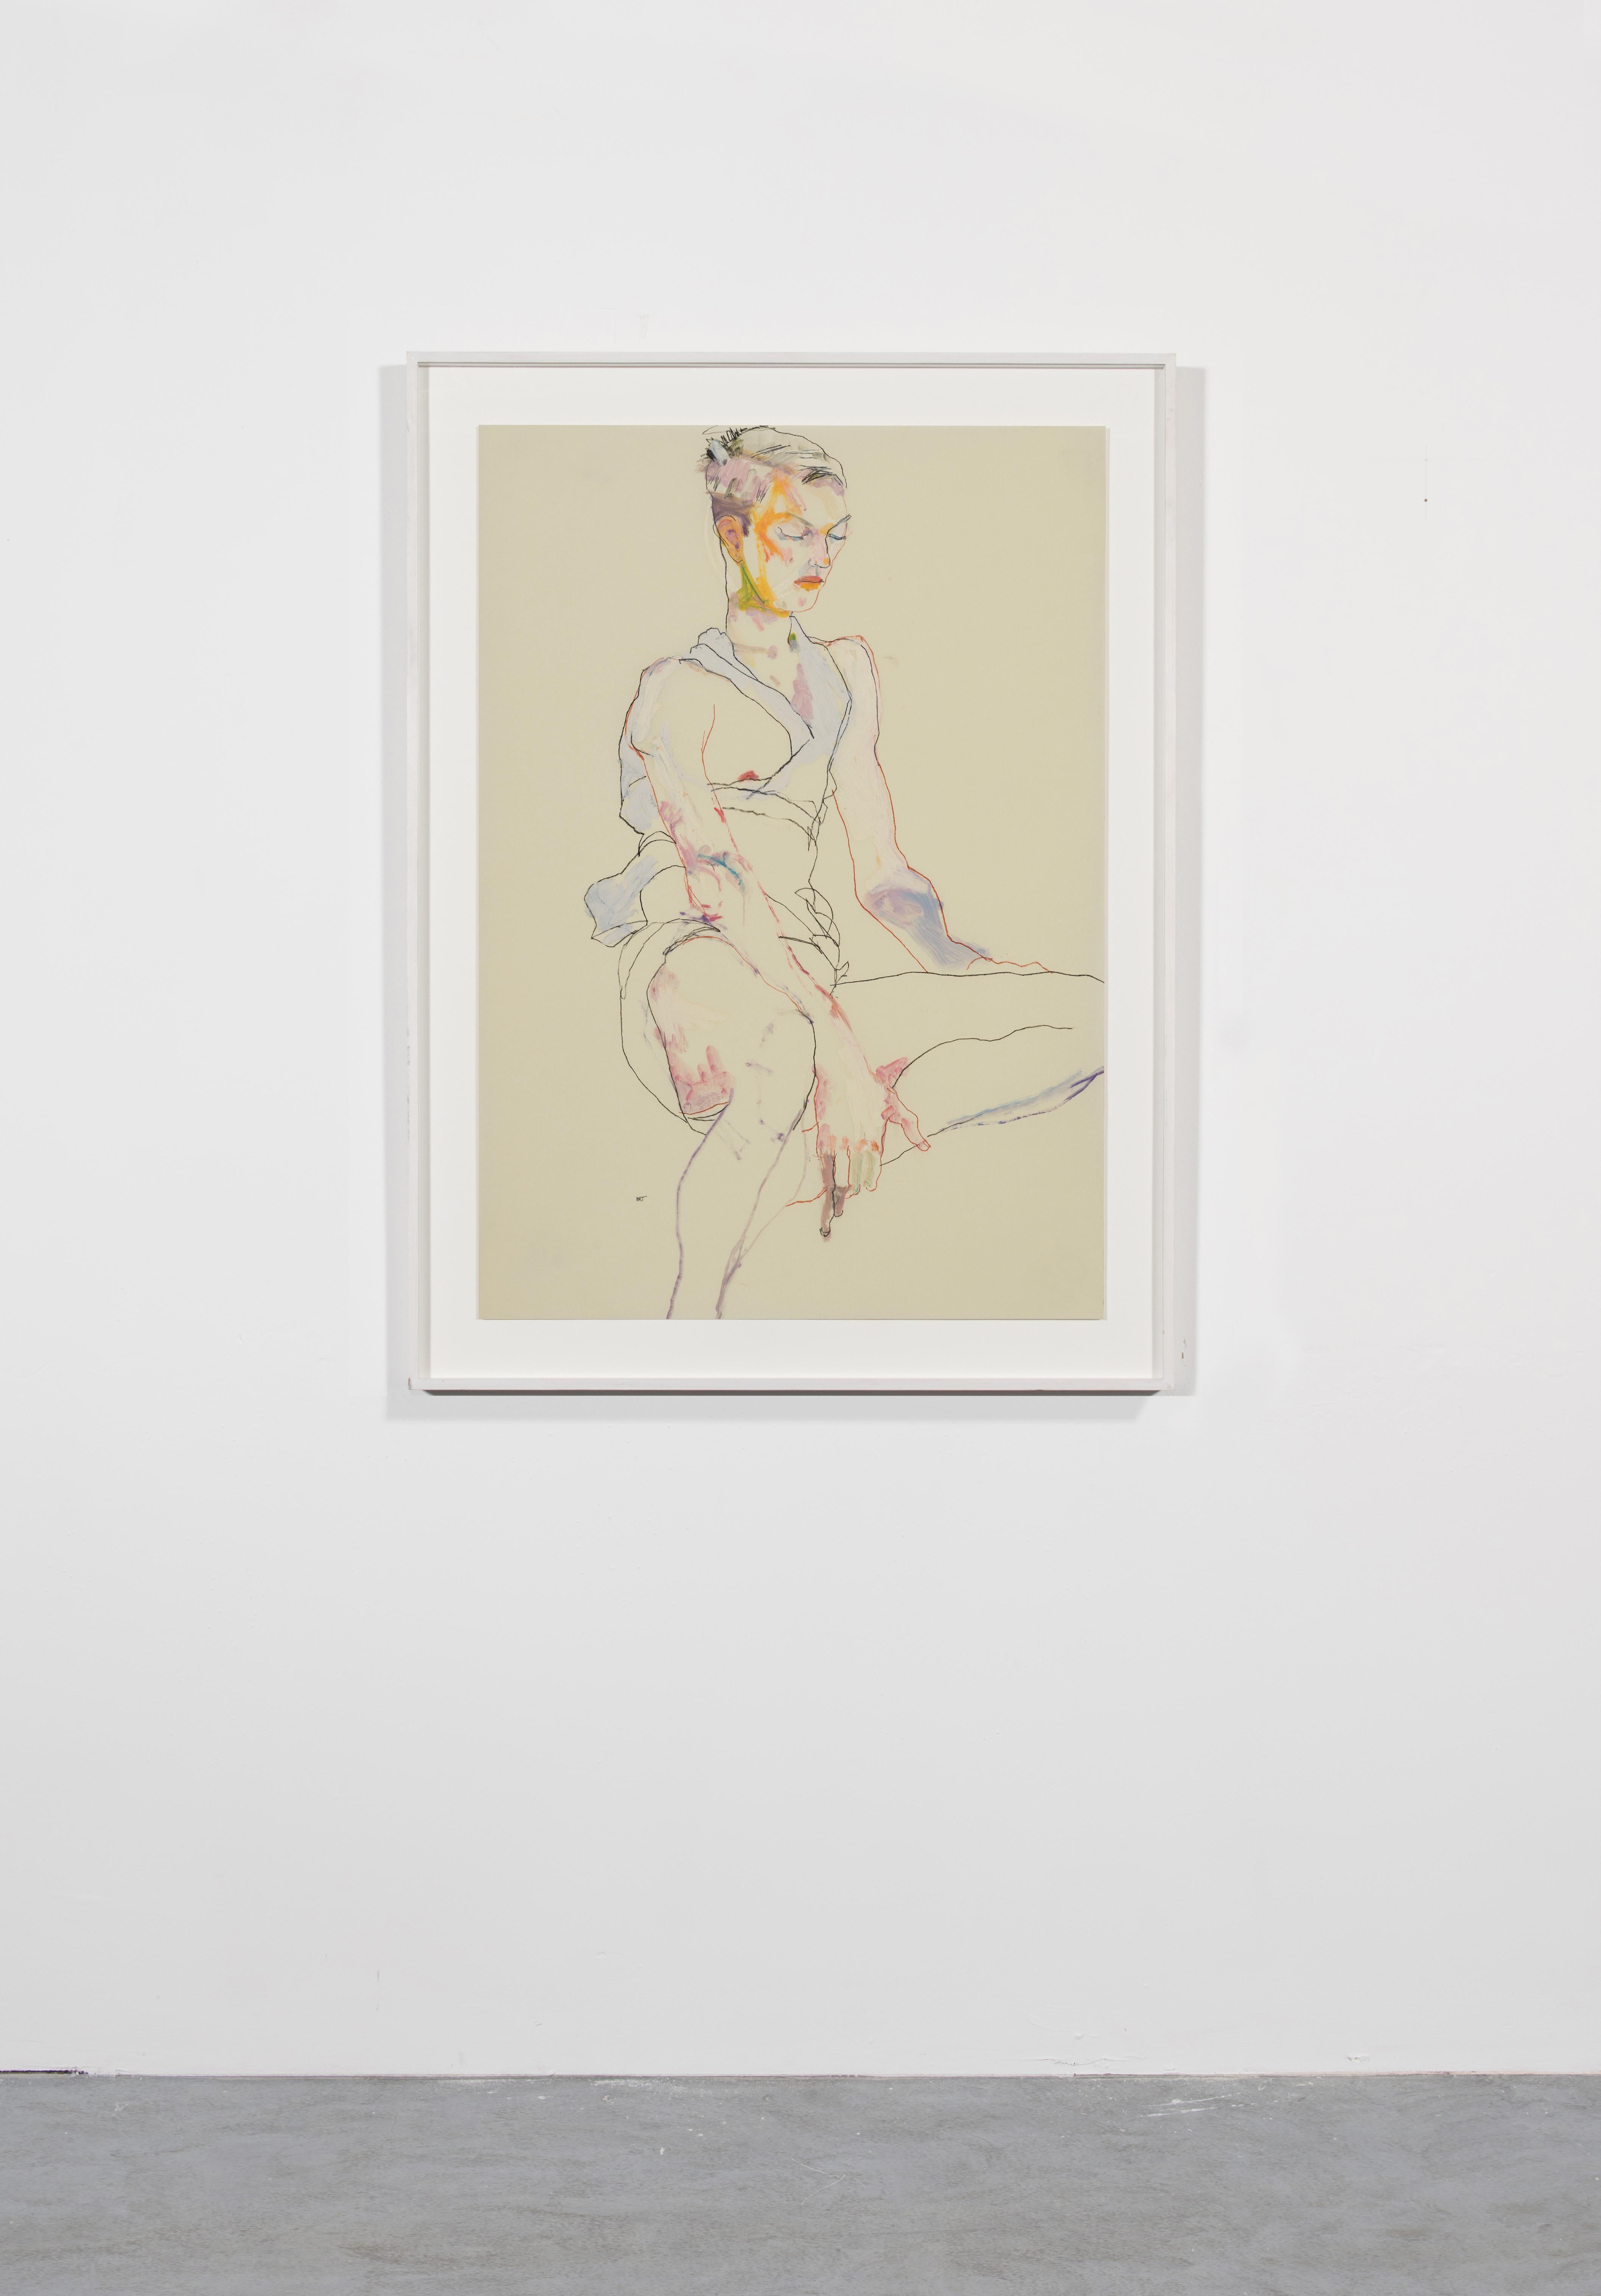 Matthew (One Leg Folded In), Mixed media on Pergamenata parchment - Contemporary Art by Howard Tangye